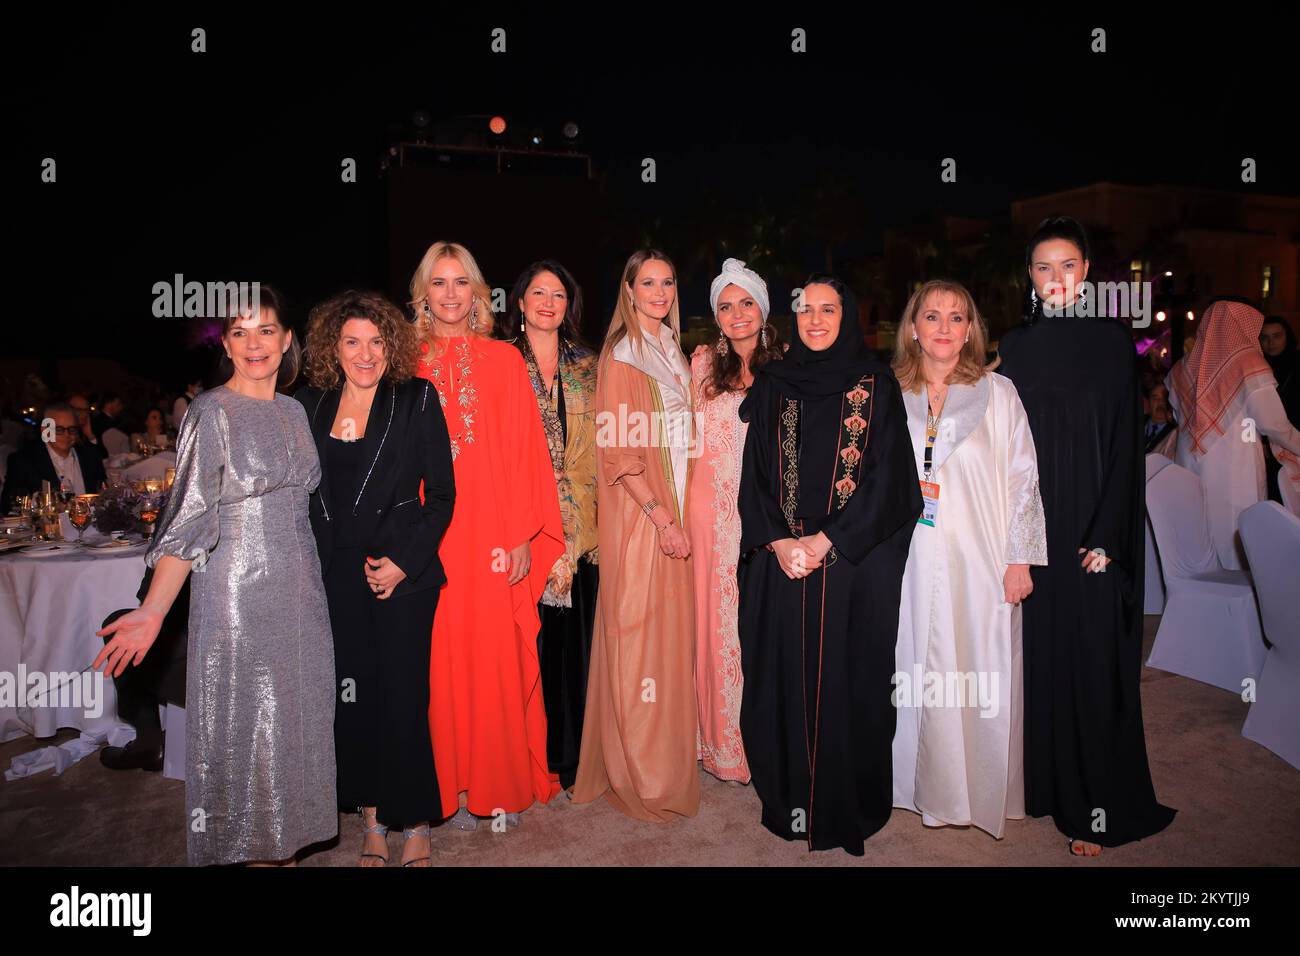 Julia Simpson, Maribel Martínez, Valeria Mazza, Lola Uña de Cárdenas, Elle Macpherson, Sandra García-Sanjuán, Princesa Haifa Al Saud, Gloria Guevara y Adriana Lima at World Tourism Summit held in Riyadh. Host of the World Travel and Tourism Council (WTTC) World Summit, Saudi Arabia has pulled off the biggest event in its history, breaking all records and drawing more international business leaders and foreign government delegations than ever before. 2,500 participants traveled to Riyadh to attend the “Travel for a better future” summit. Friday December 2, 2022 POOL/AVORY CELEBRITY ACCESS/C Stock Photo